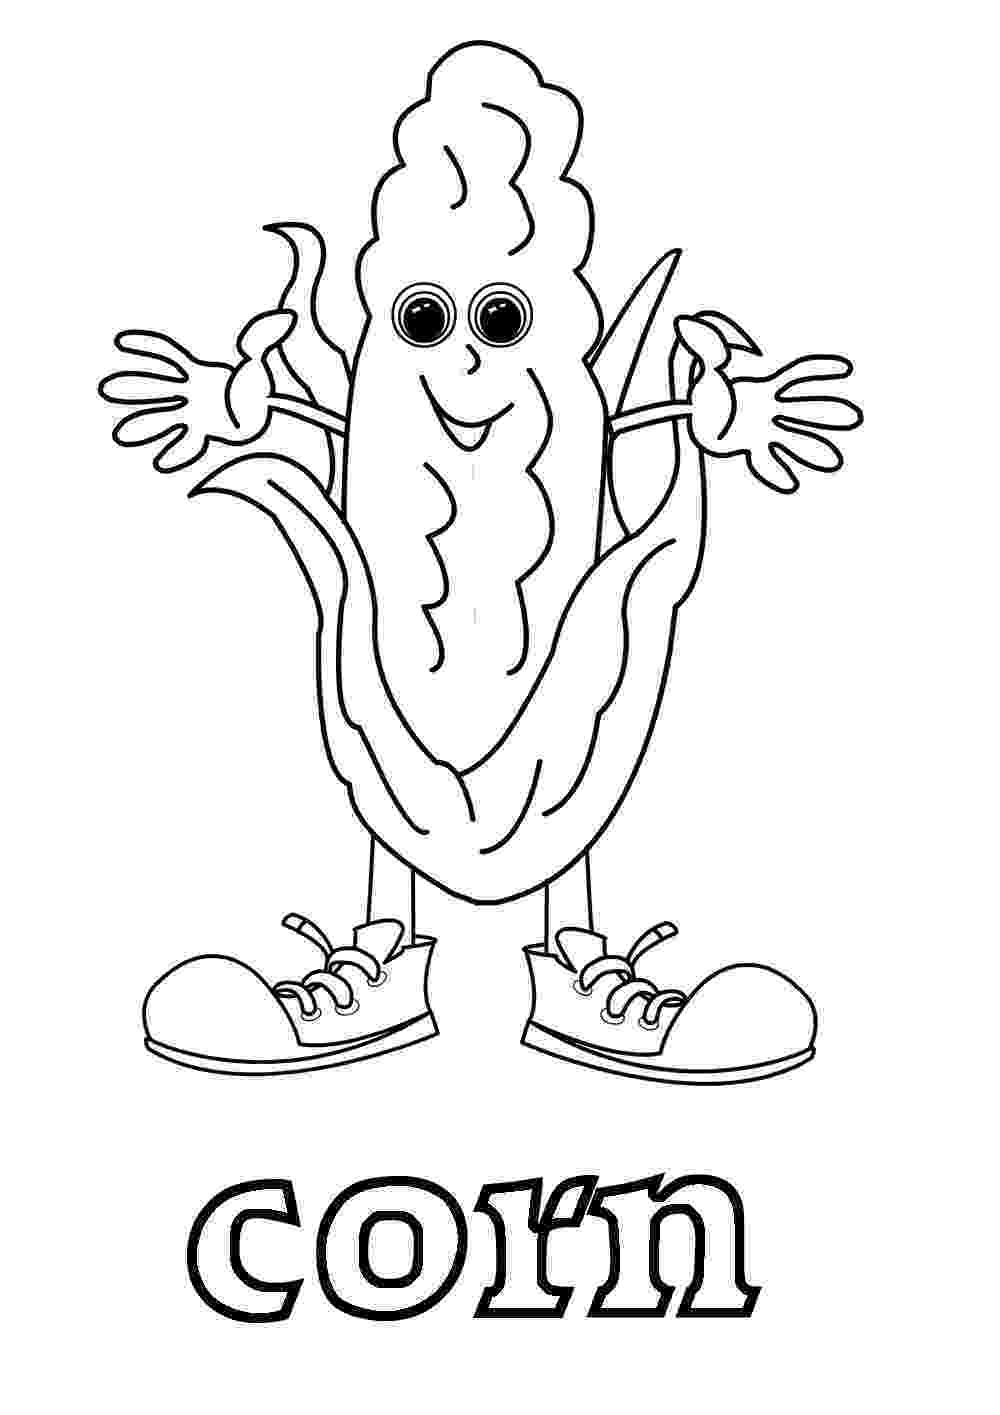 vegetables coloring vegetable coloring pages best coloring pages for kids vegetables coloring 1 1